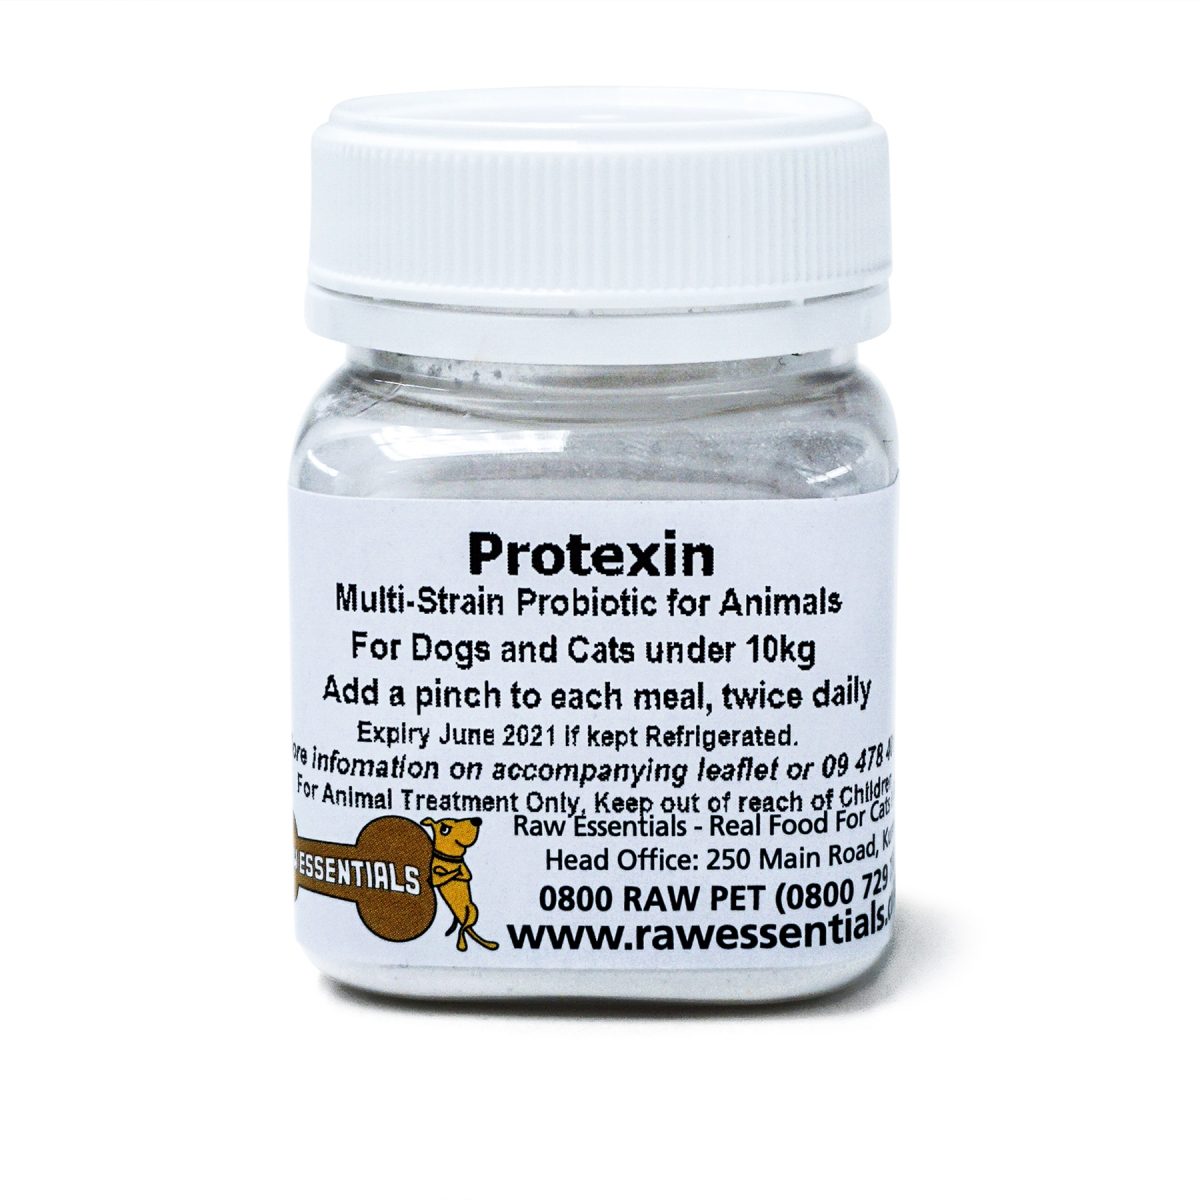 Plastic Bottle Of Protexin For Dogs And Cats